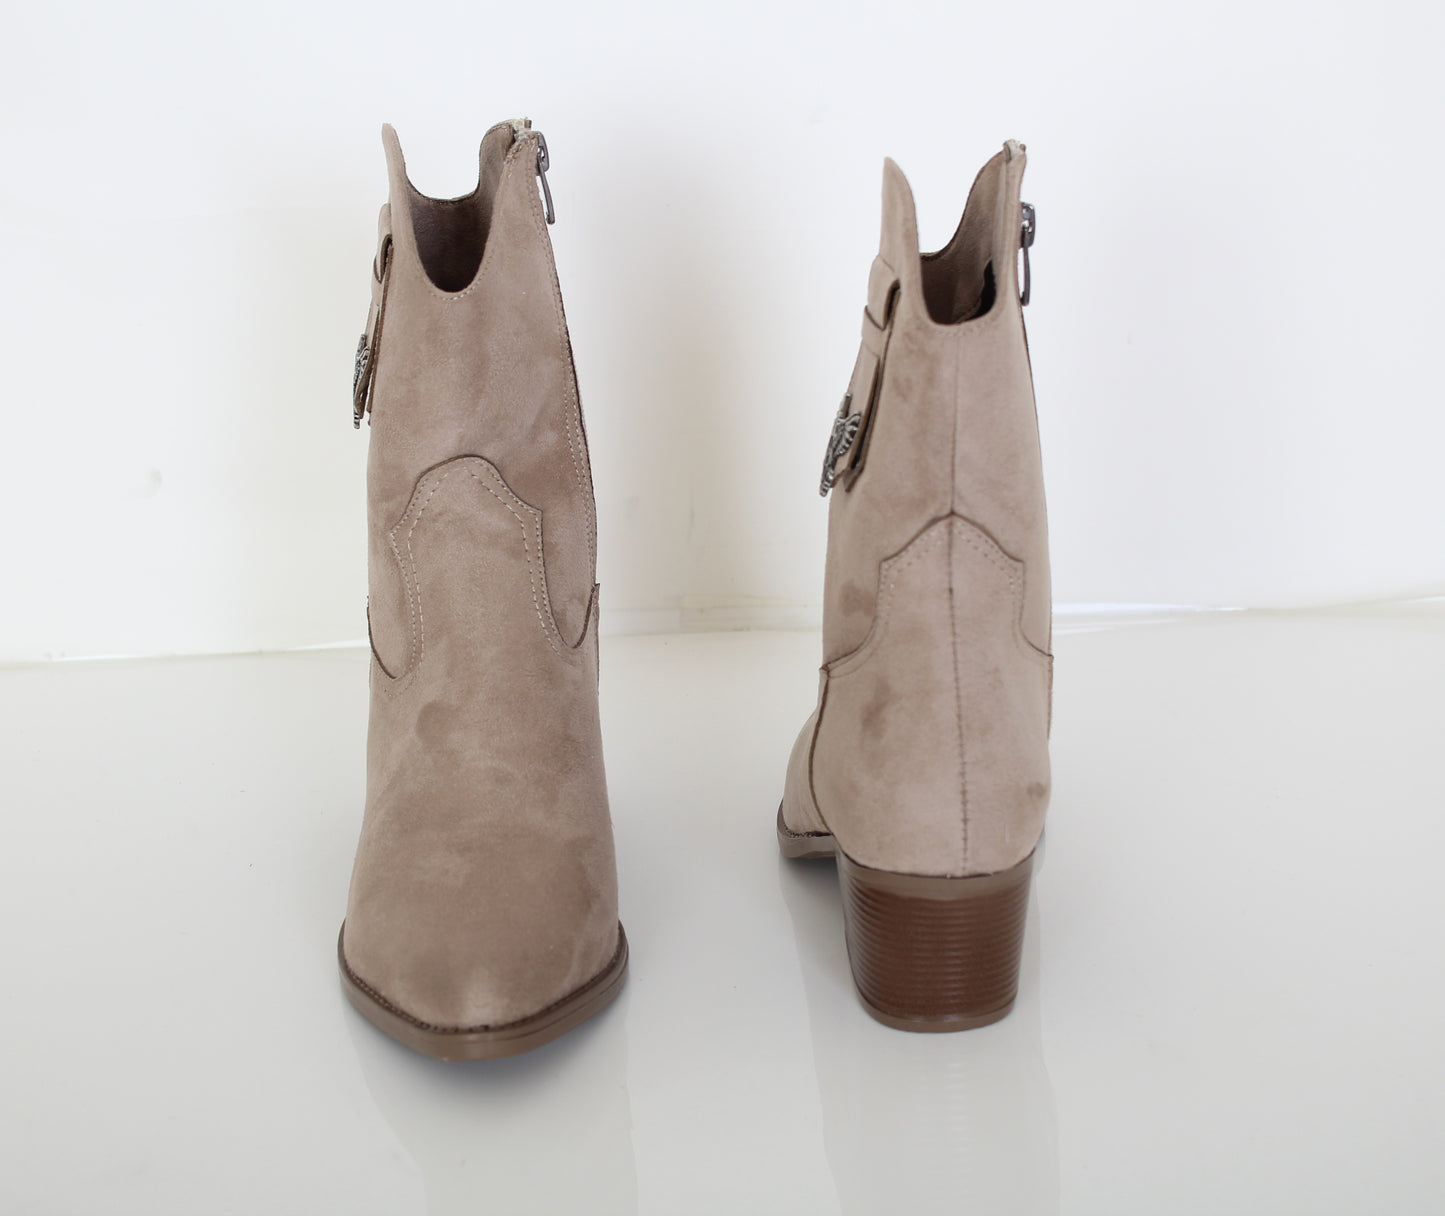 STAYIL- WESTERN STYLE BOOTS